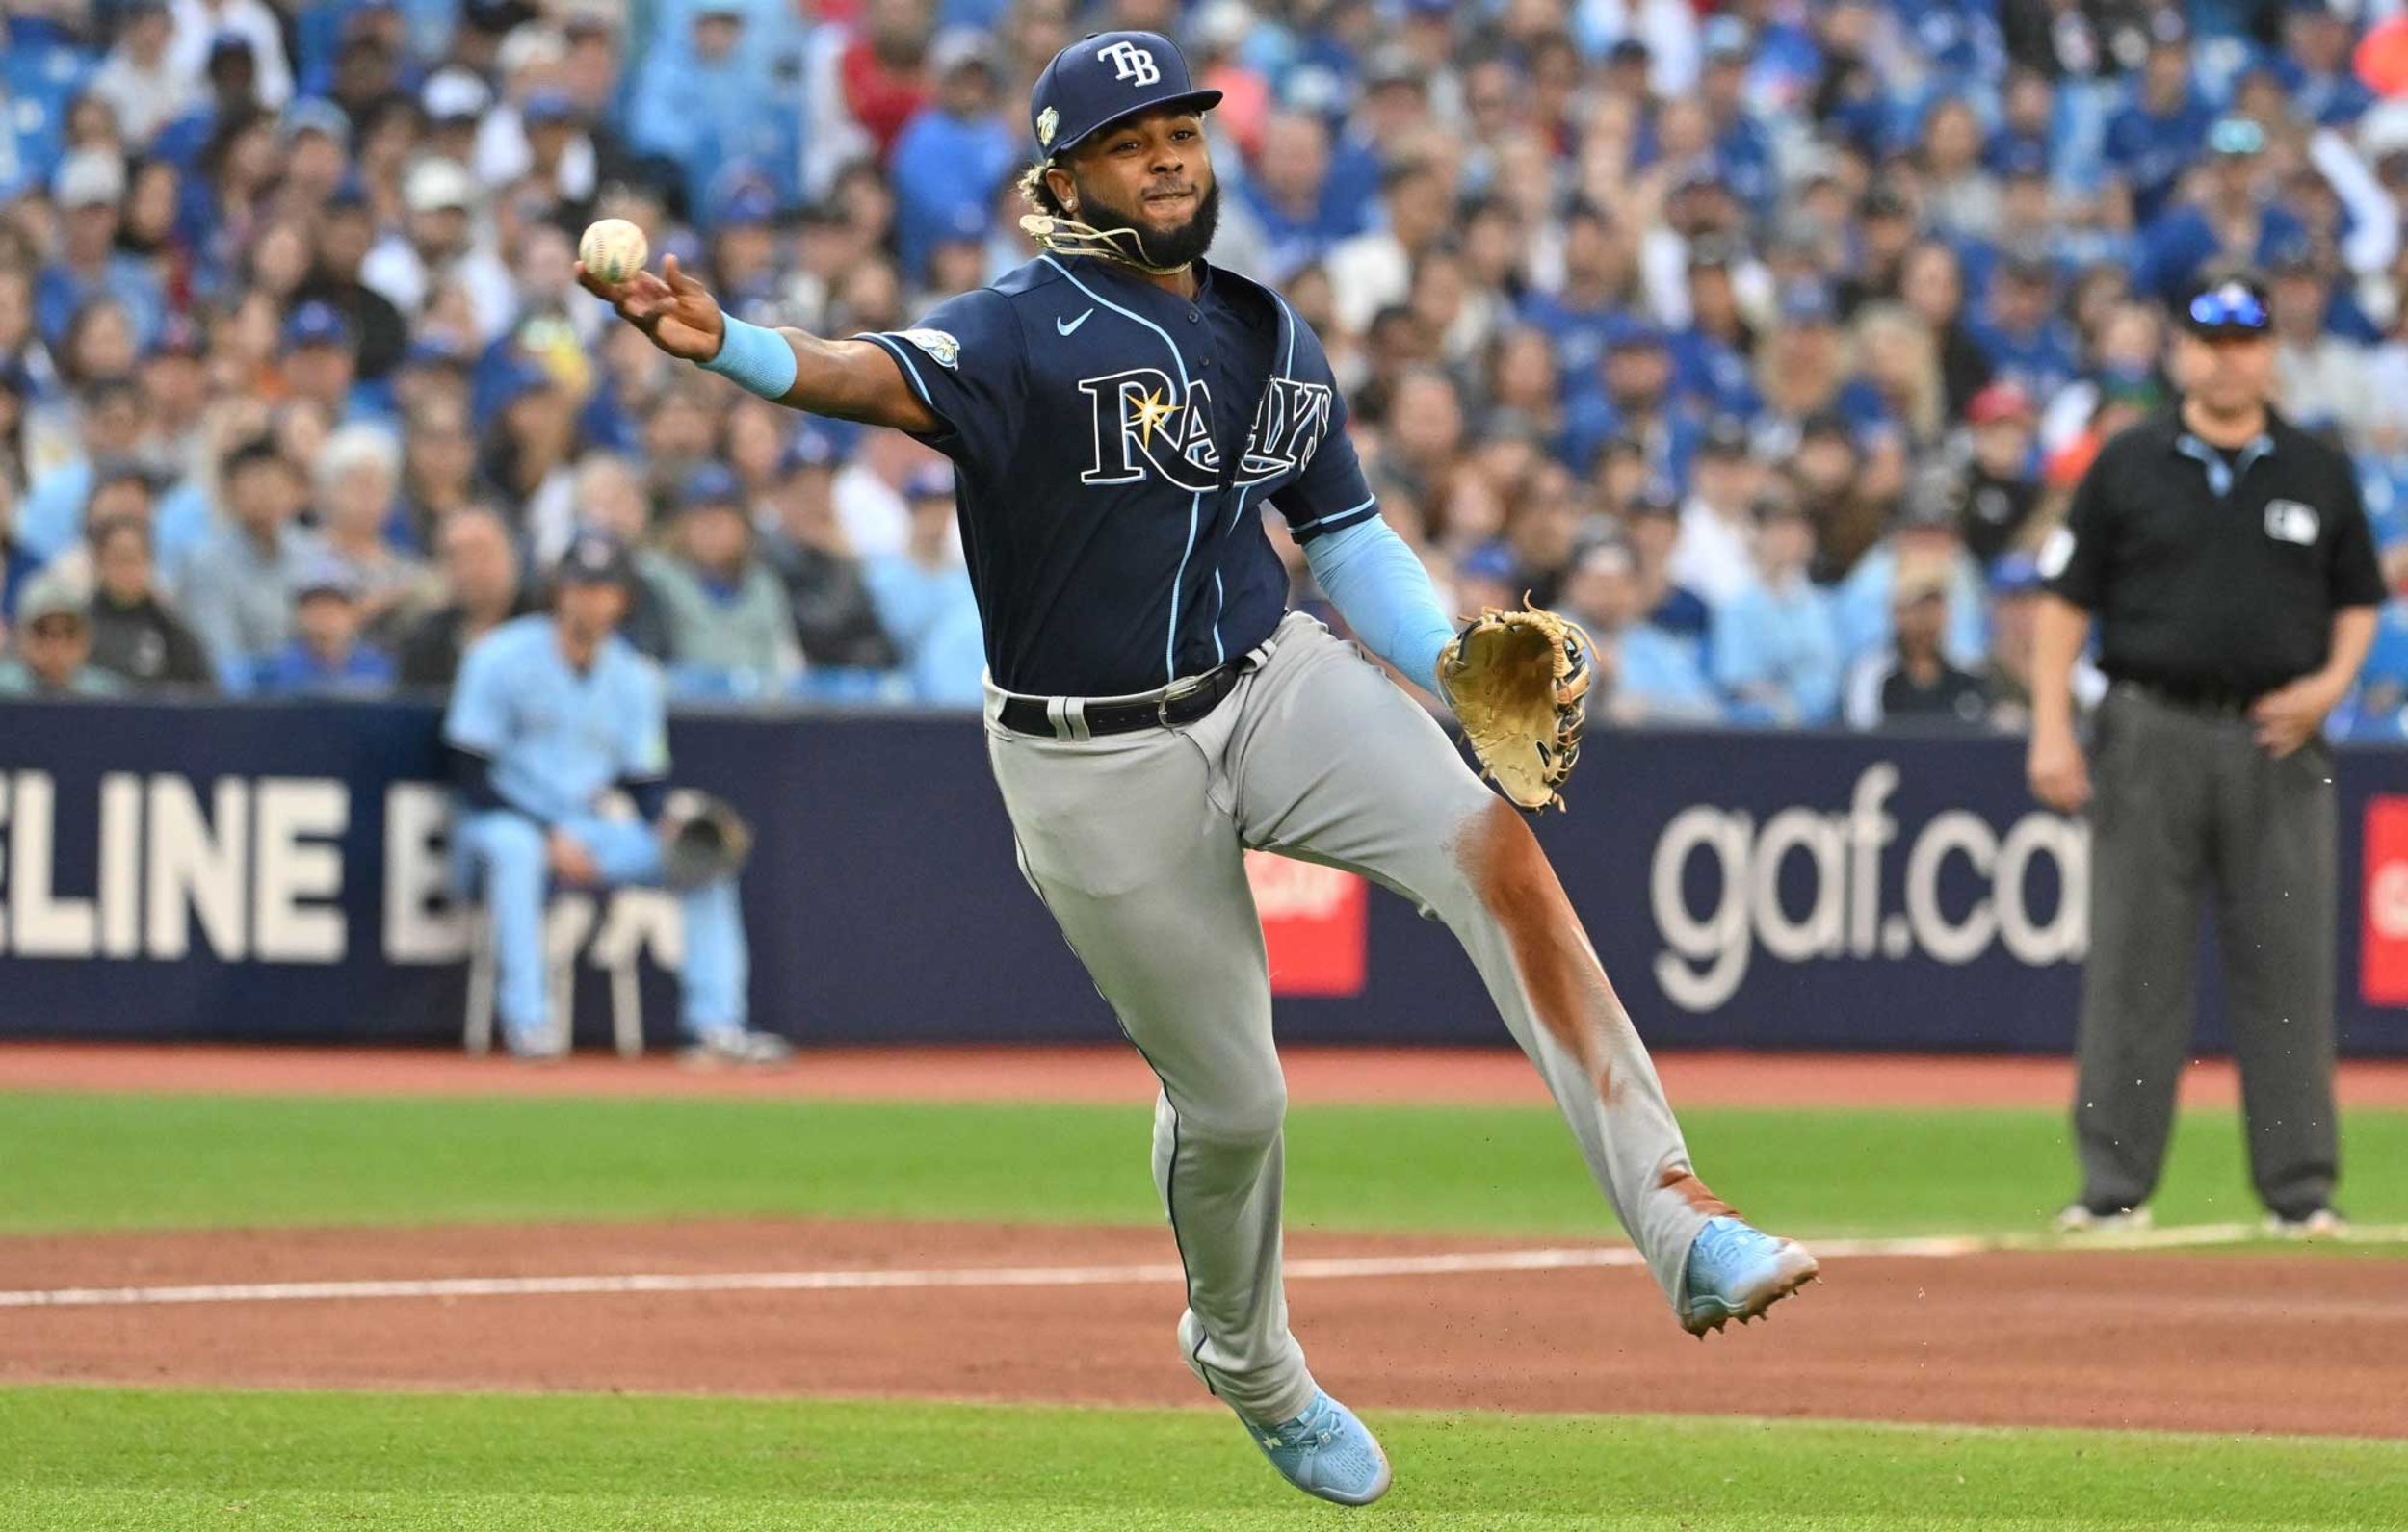 <p>Caminero is one of the top-hitting prospects in the game and got a taste of MLB late last season. It's unclear if Caminero will begin the 2024 season in the majors, but he will almost certainly make a big impact for a Rays lineup that's searching for an impact bat on the infield.</p><p>You may also like: <a href='https://www.yardbarker.com/mlb/articles/which_mlb_teams_had_the_best_world_series_rotations_of_all_time_022724/s1__30318632'>Which MLB teams had the best World Series rotations of all time?</a></p>